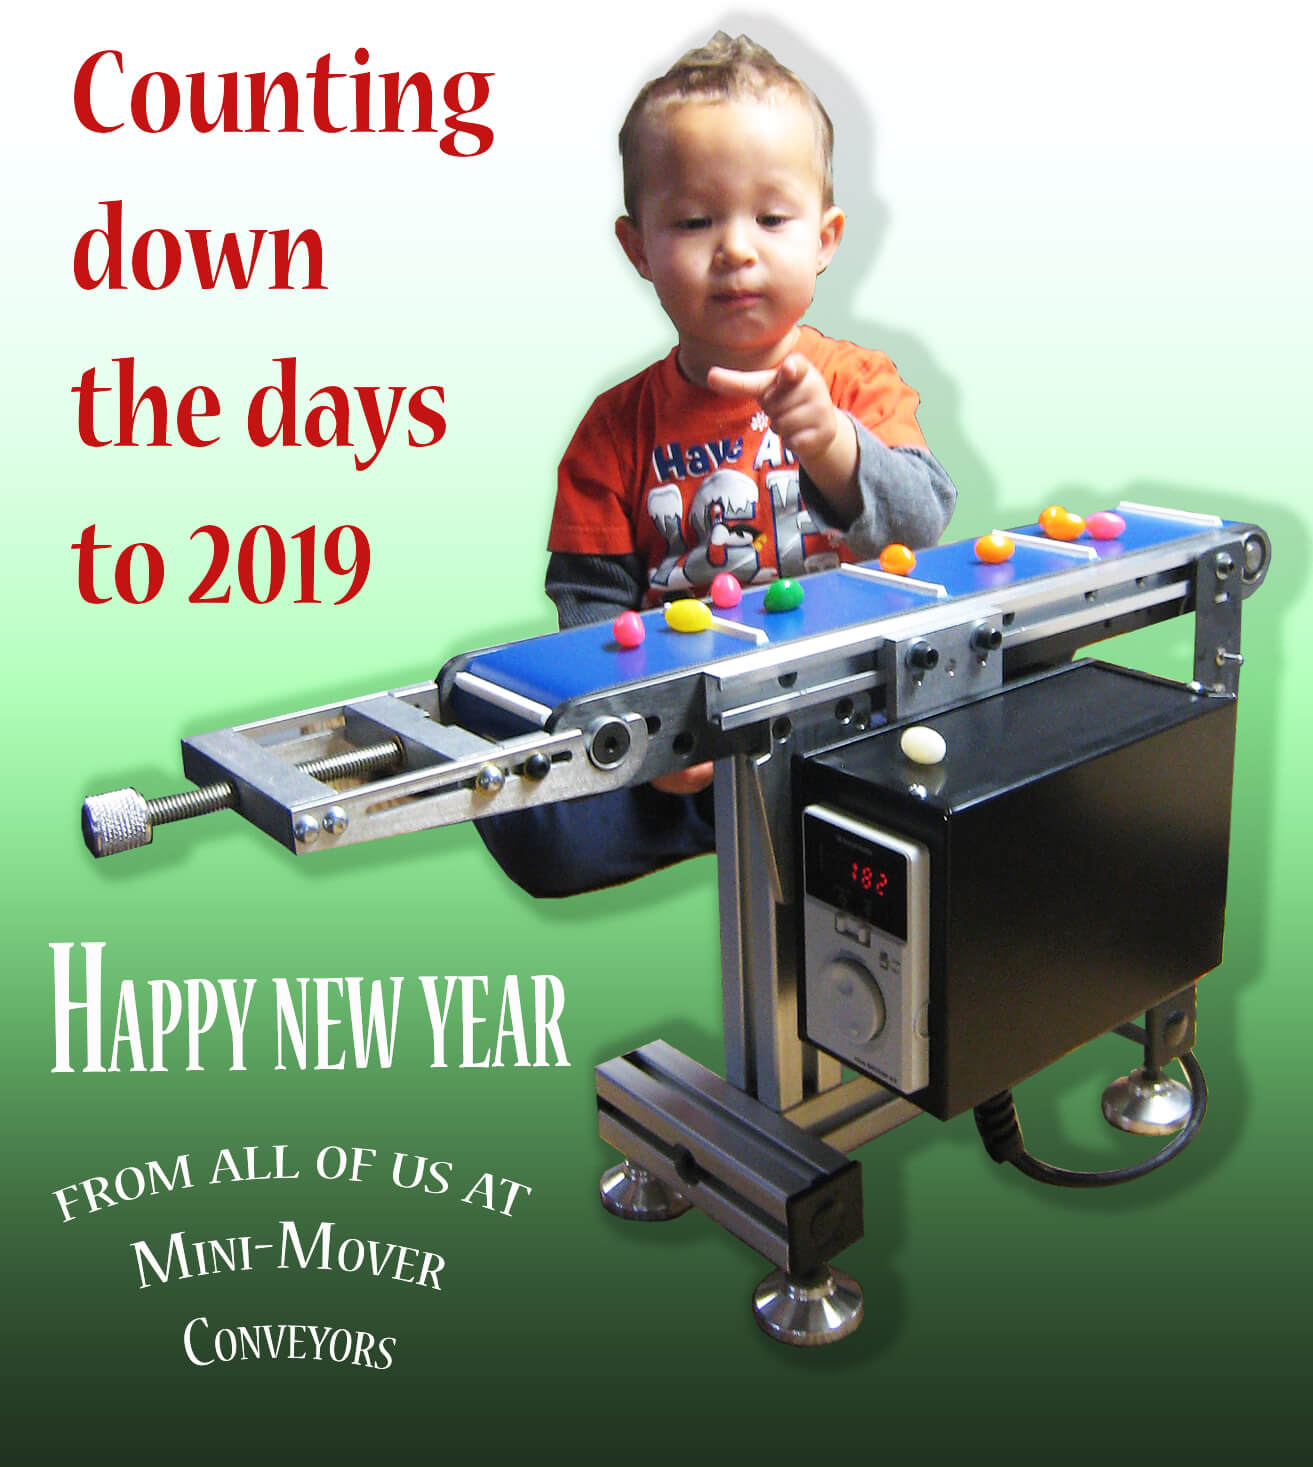 Happy 2019 from Mini-Mover Conveyors